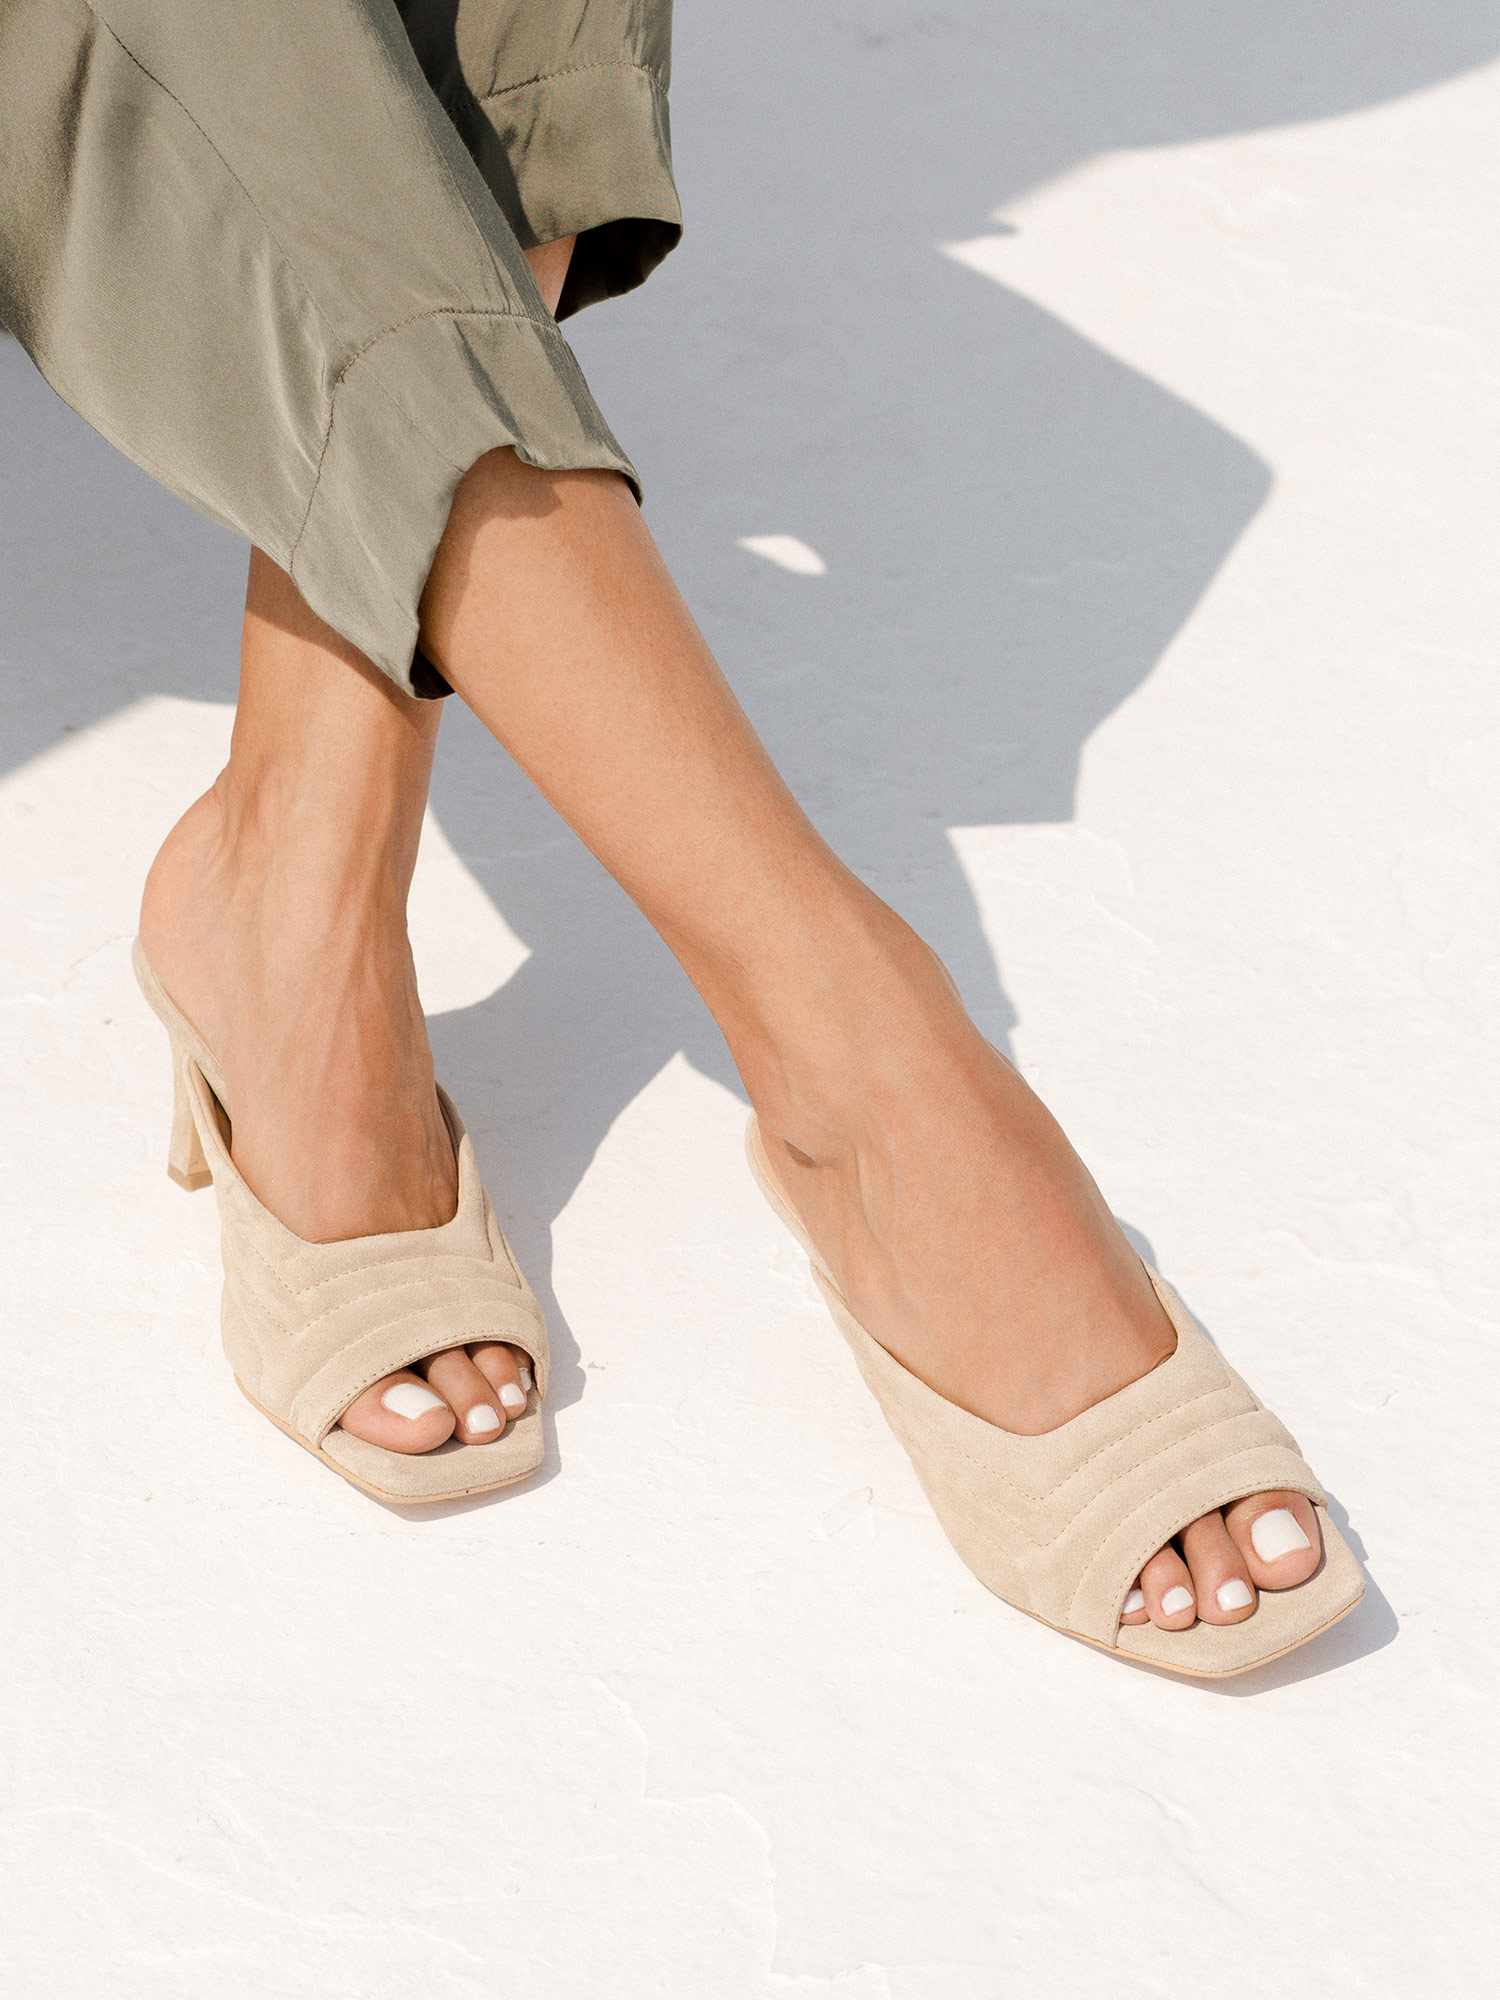 Leather quilted mules in sand suede